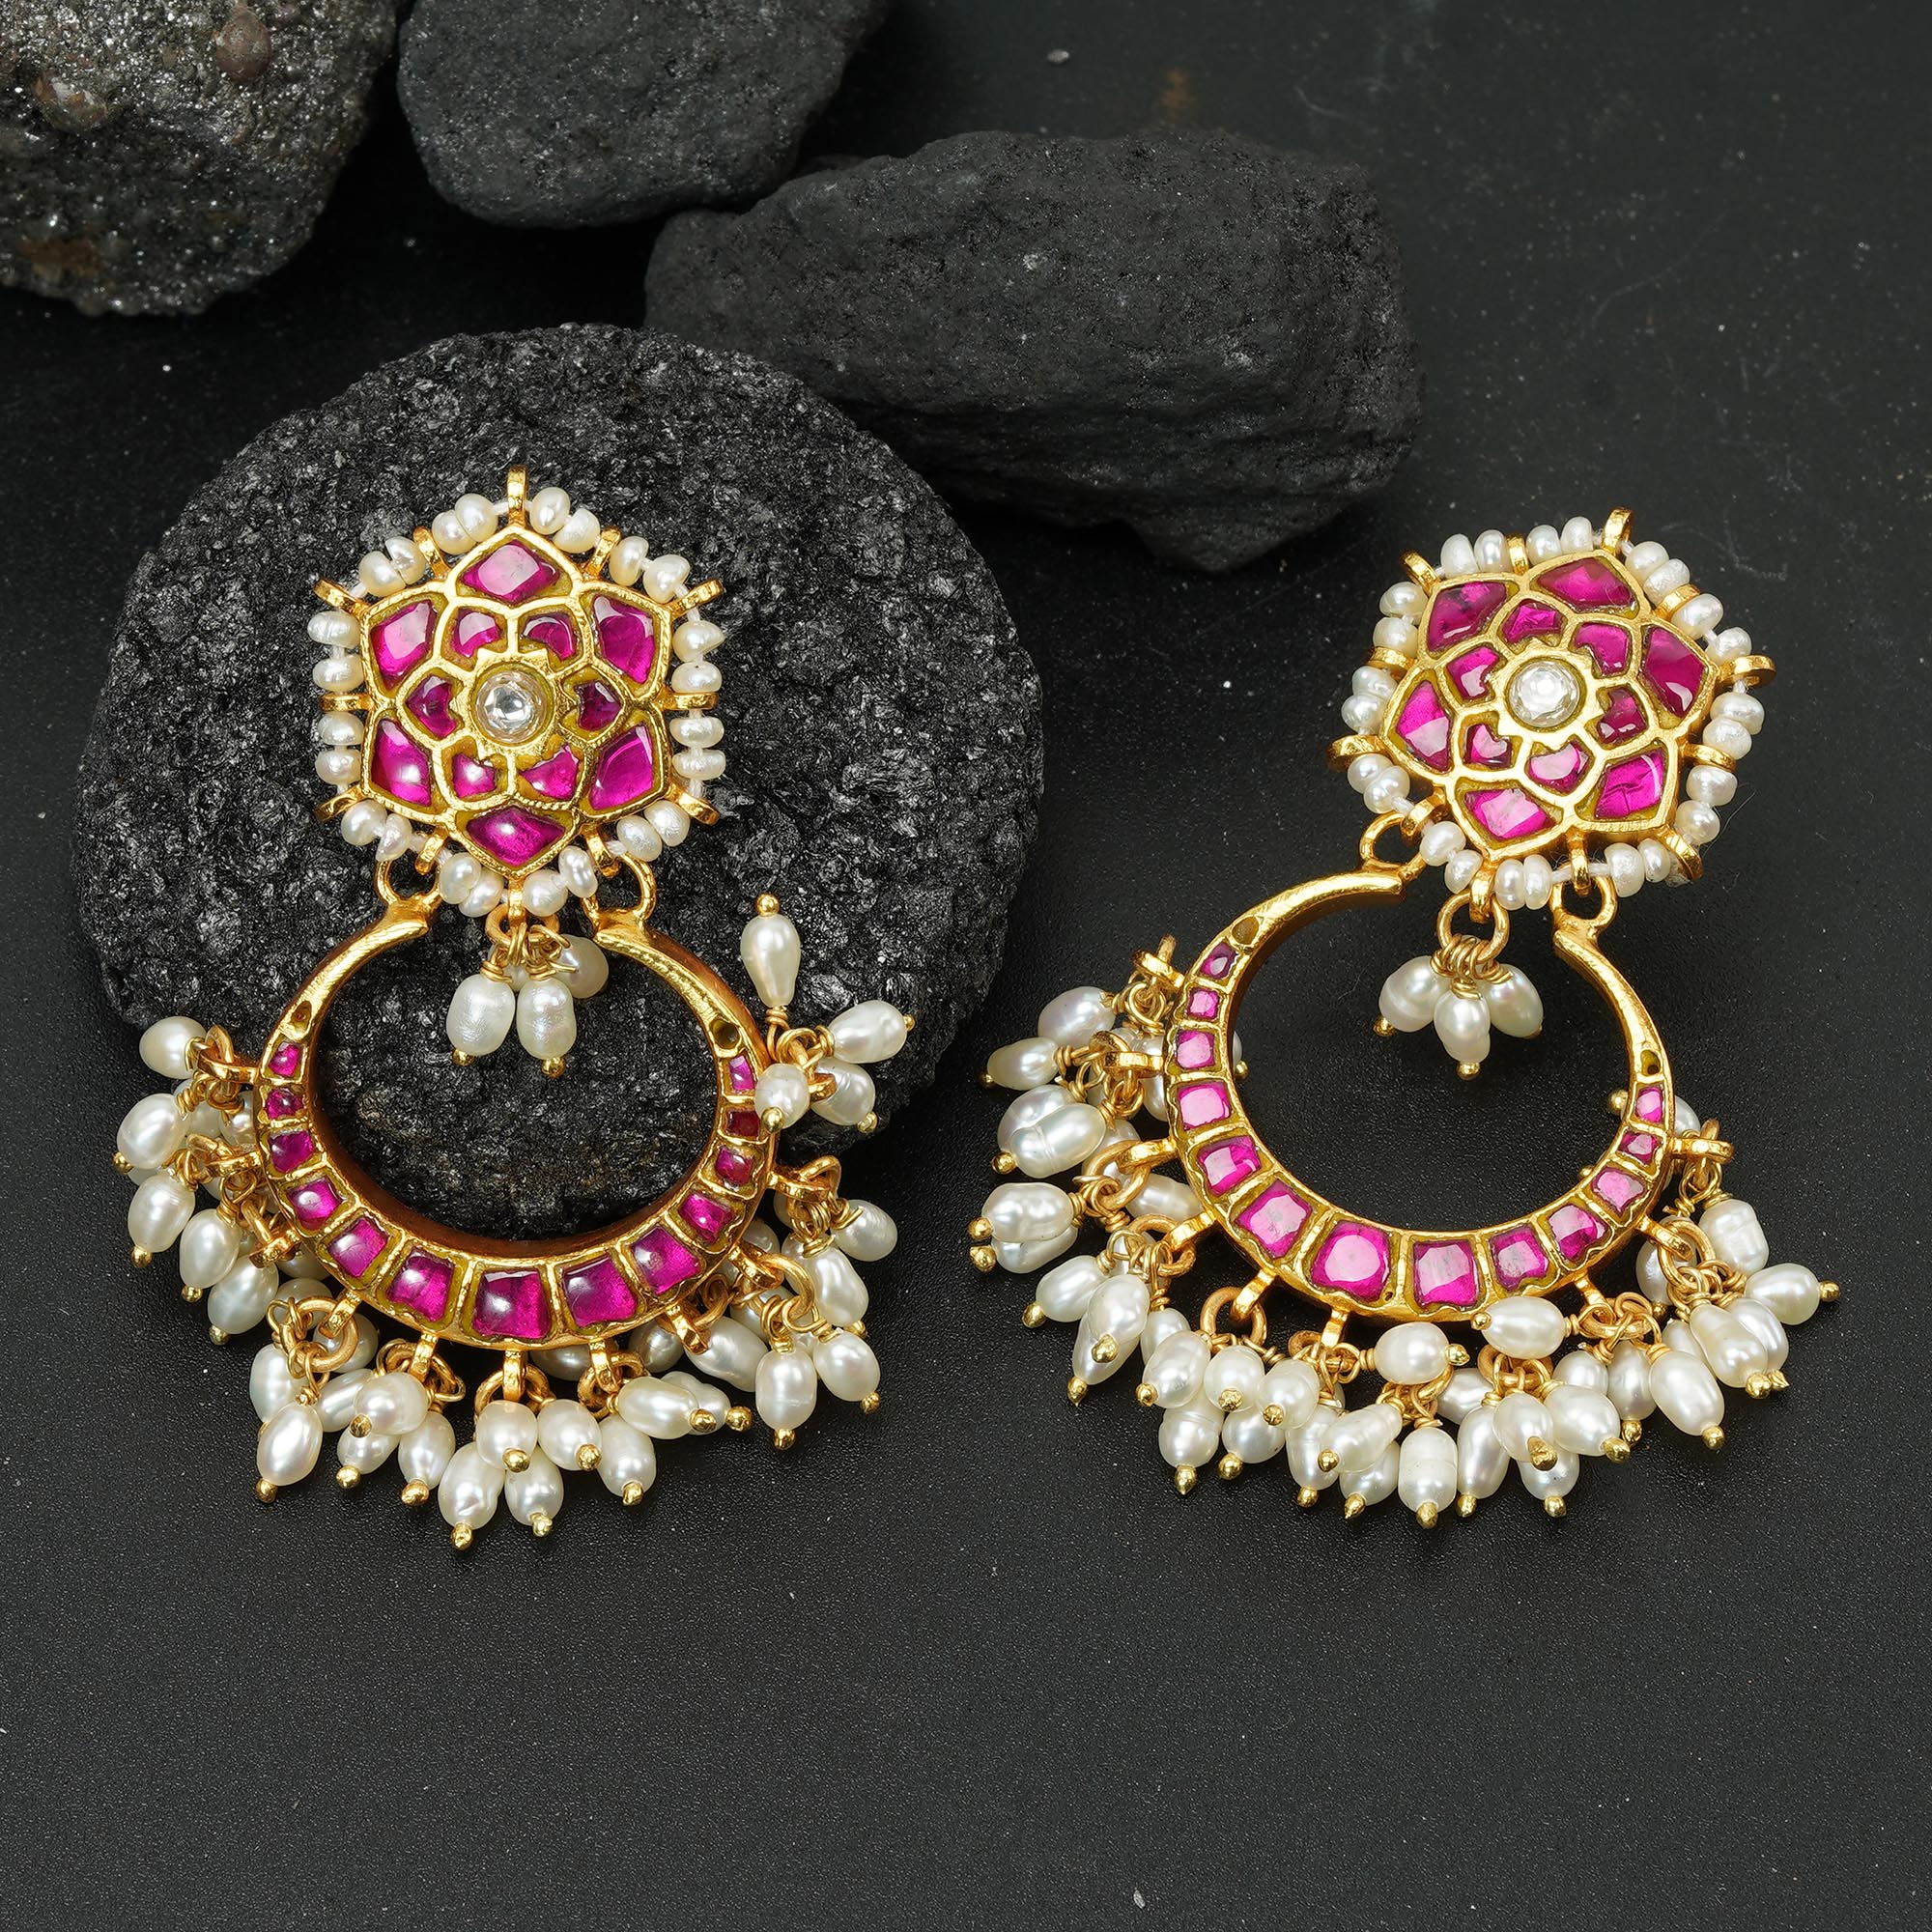 Amazon.com: Priyaasi Indian Jhumka Earring for Women | Mint Green Ethnic  Earrings | Trendy Leaf Design | White Bead Drop & Stone-Studded | Pushback  Closure | Bridal Earrings for Festival & Function: